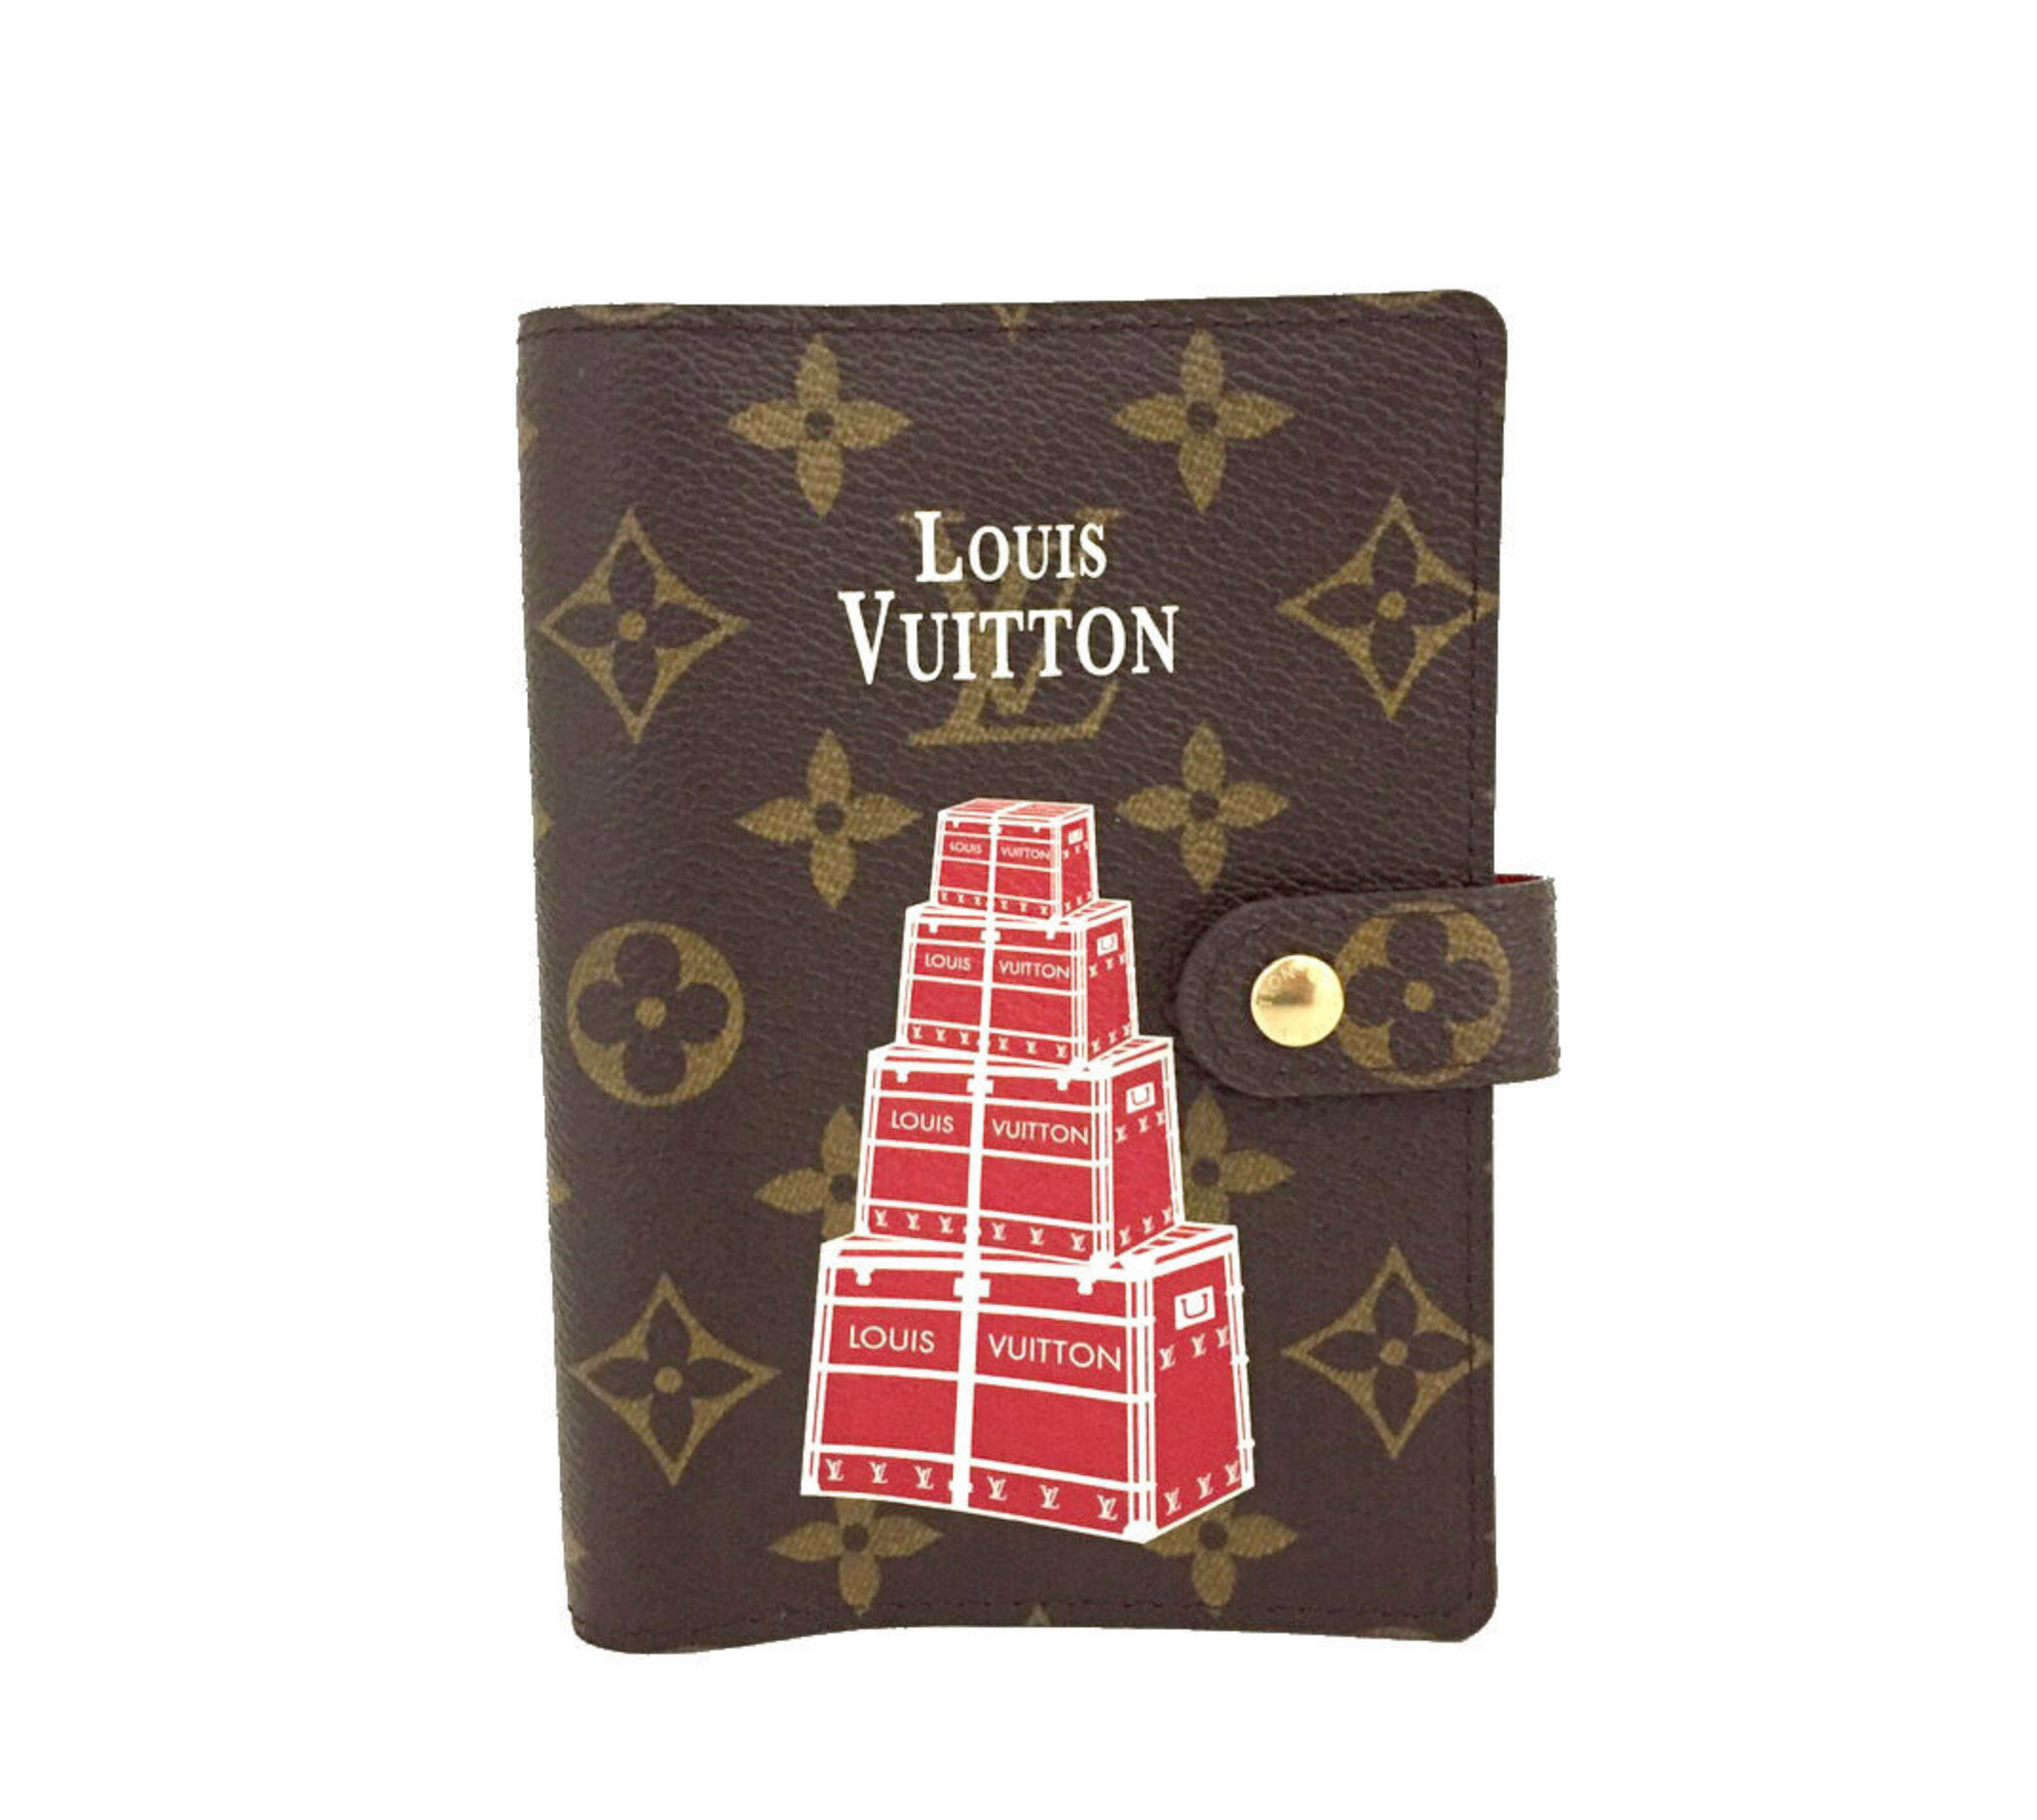 LOUIS VUITTON(ルイヴィトン) / 18AW/PEACE AND LOVE ハリントン